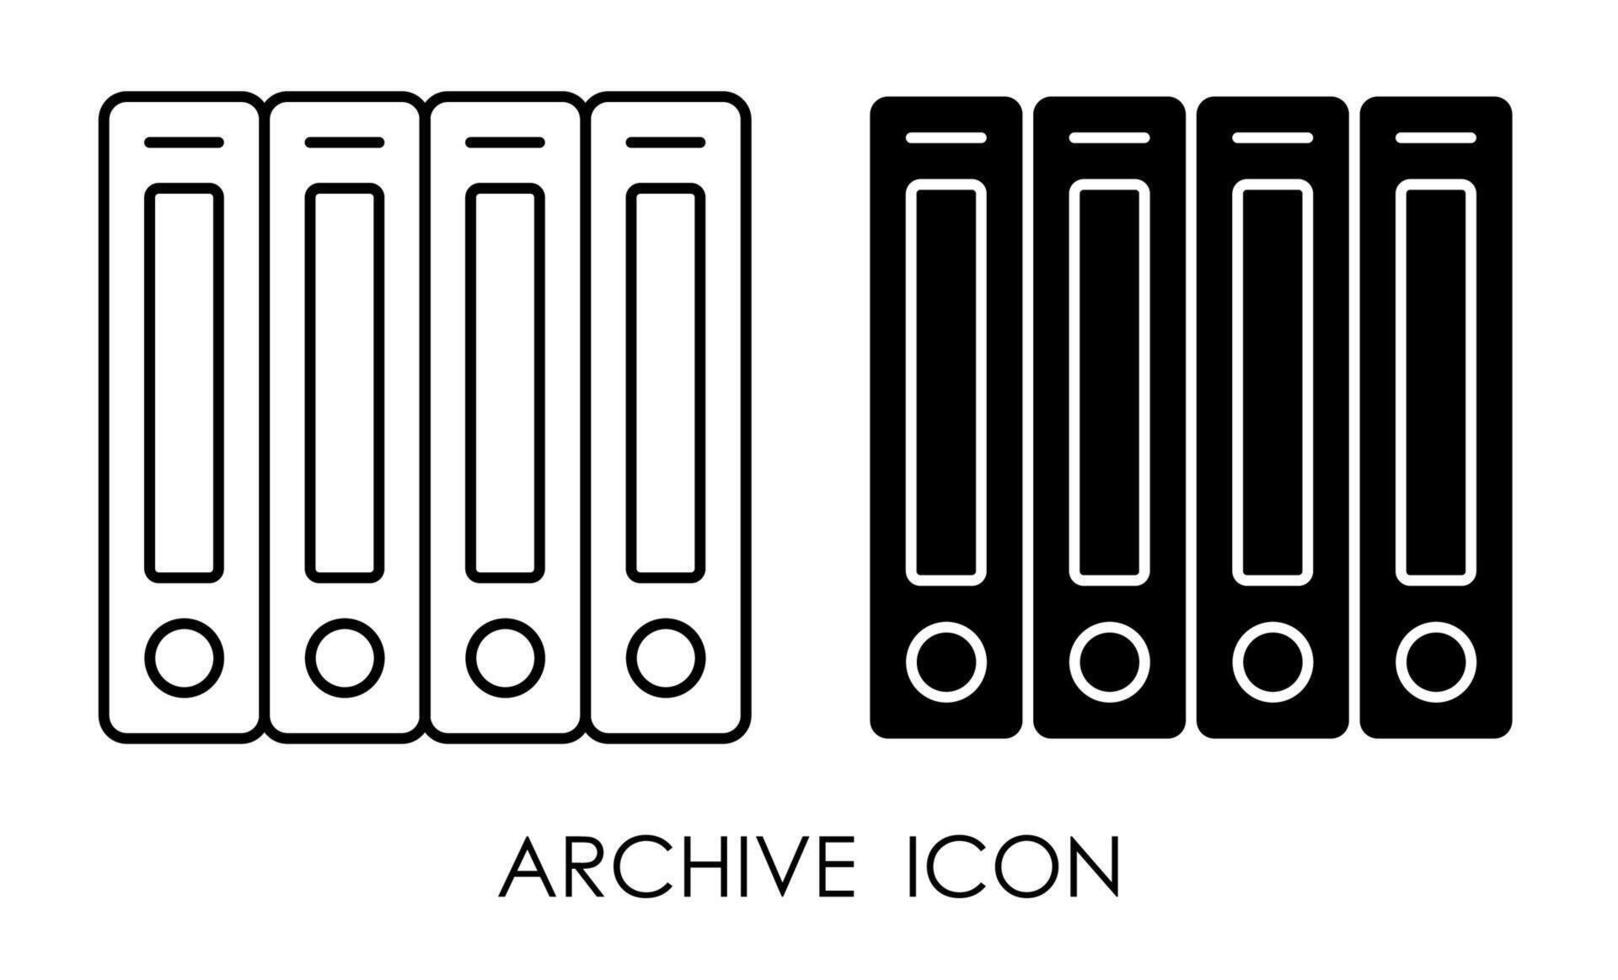 archive with documents icon. Storage of accounting, financial and personal documents in archive. Simple black and white vector